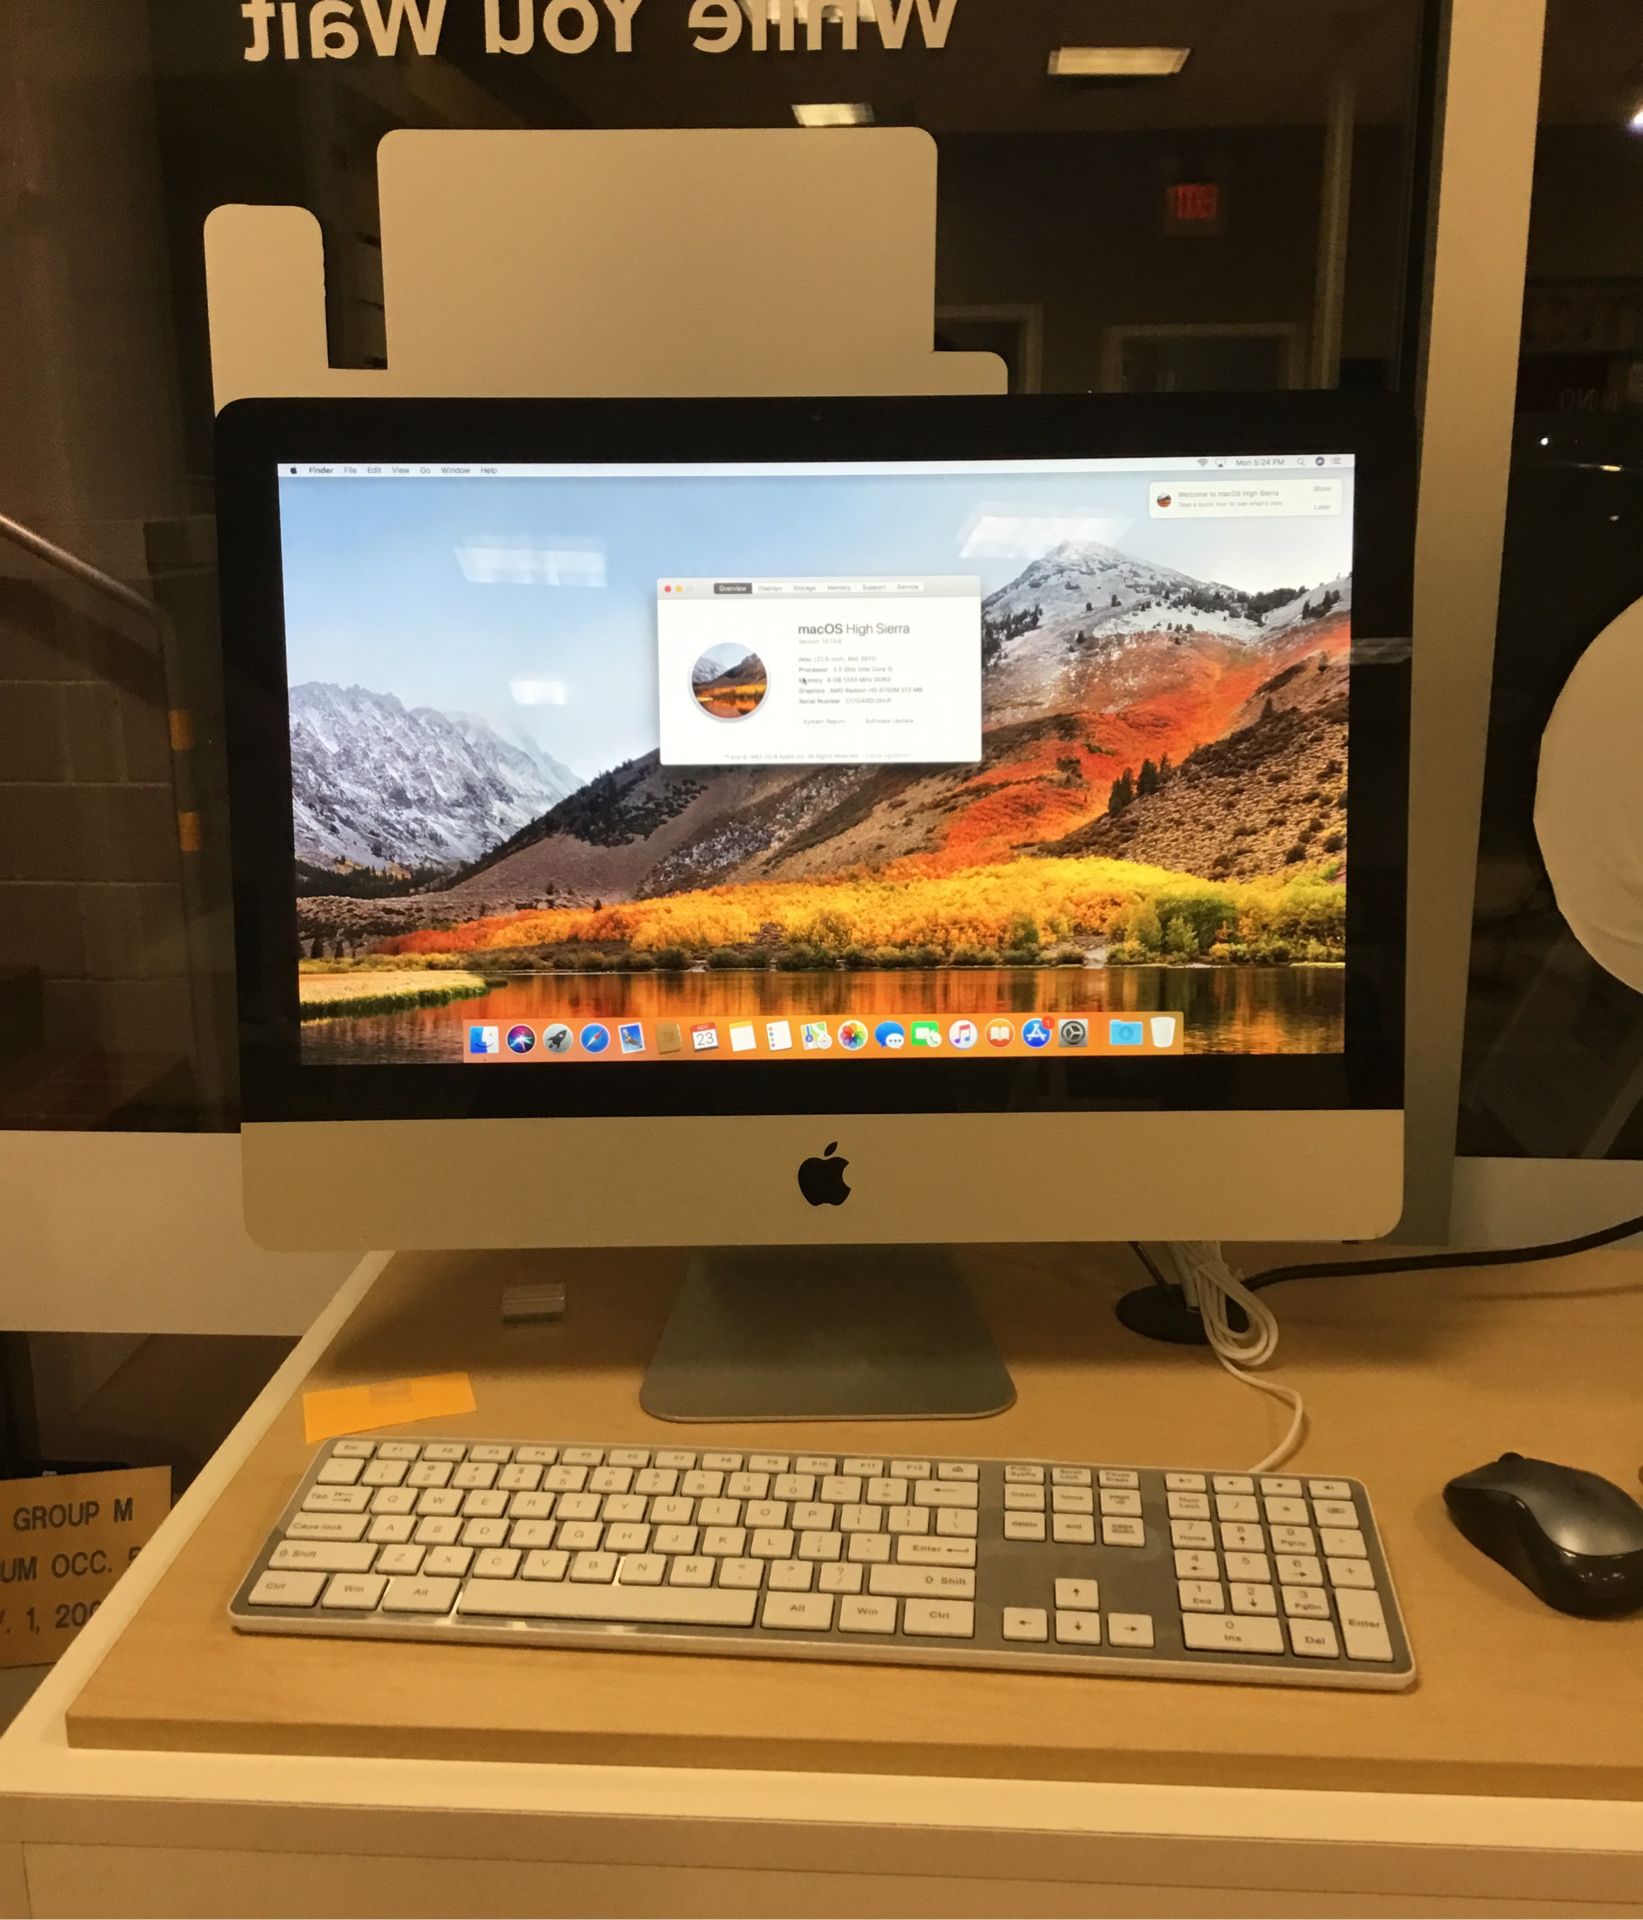 21.5” iMac 8GB, 120GB in excellent condition